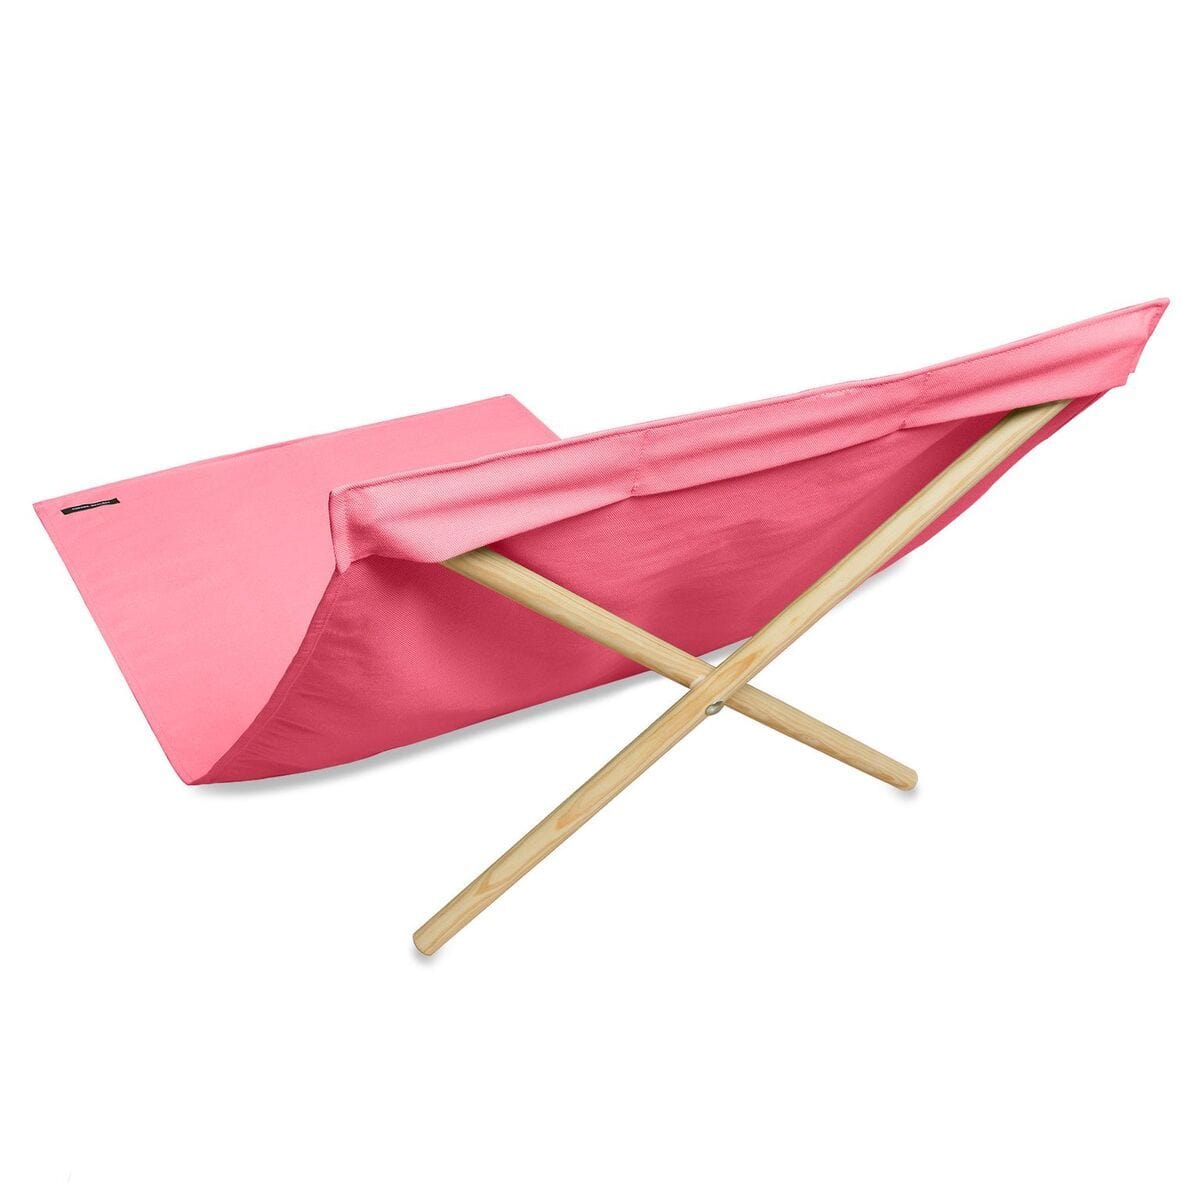 HomeRoots Outdoors Beach Chairs Pink / Deck Chair Canevas & Pinetree Wood from France 55.10" X 27.55" X 13.80" Pink Deck Chair Canevas & Pinetree Wood from France Beach Chair